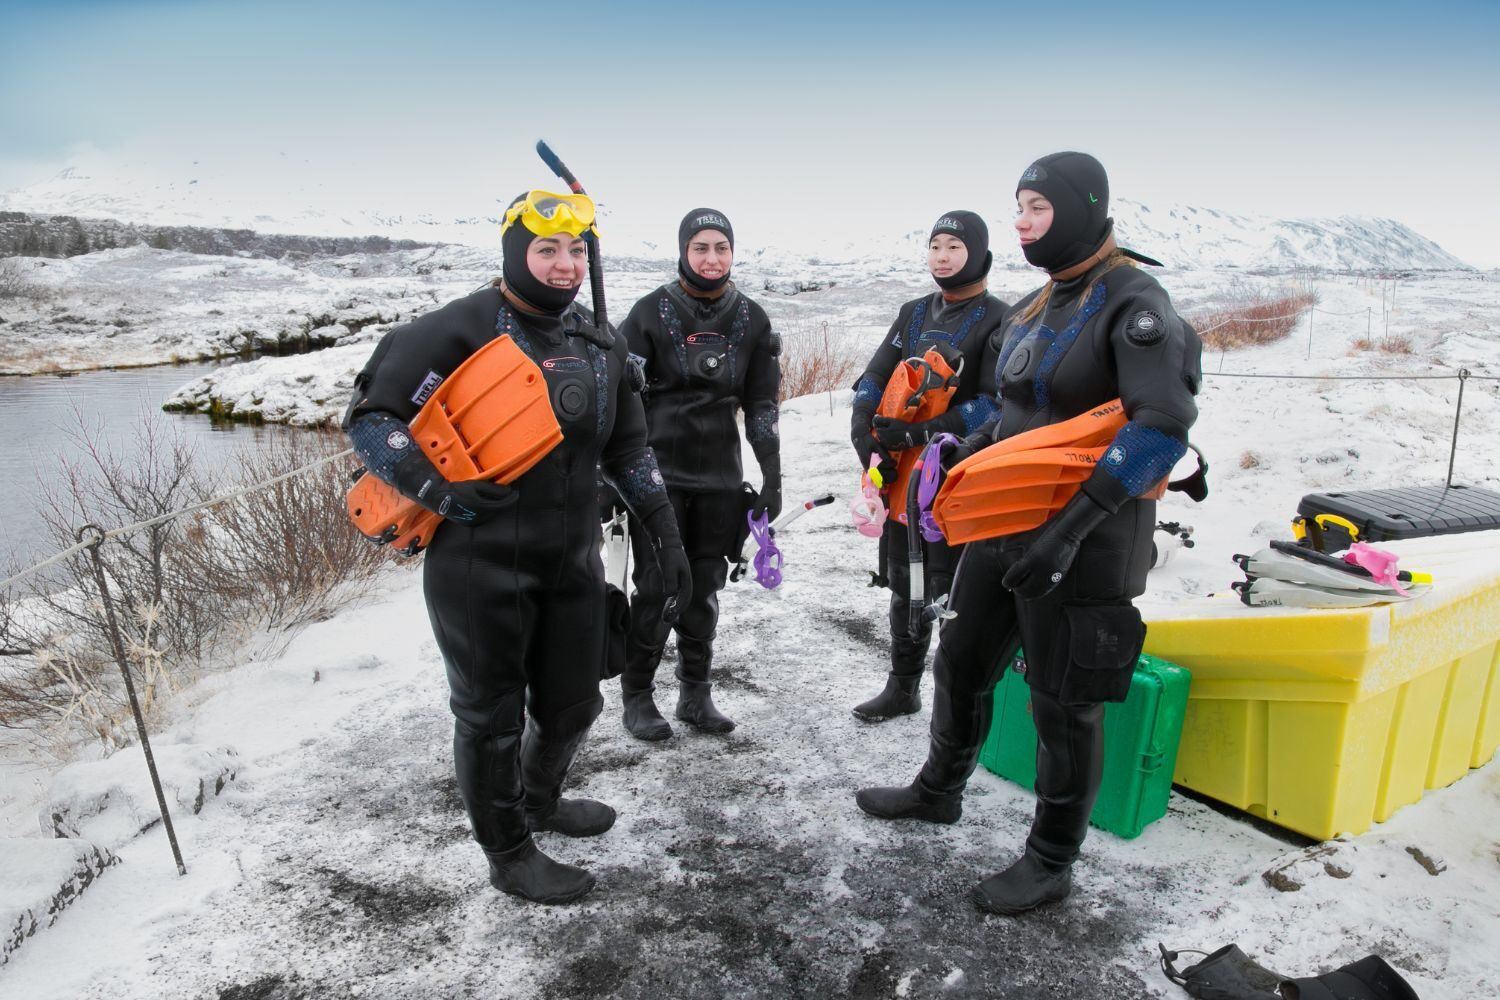 Group of people ready to go snorkeling at Silfra Rift in snowy landscape